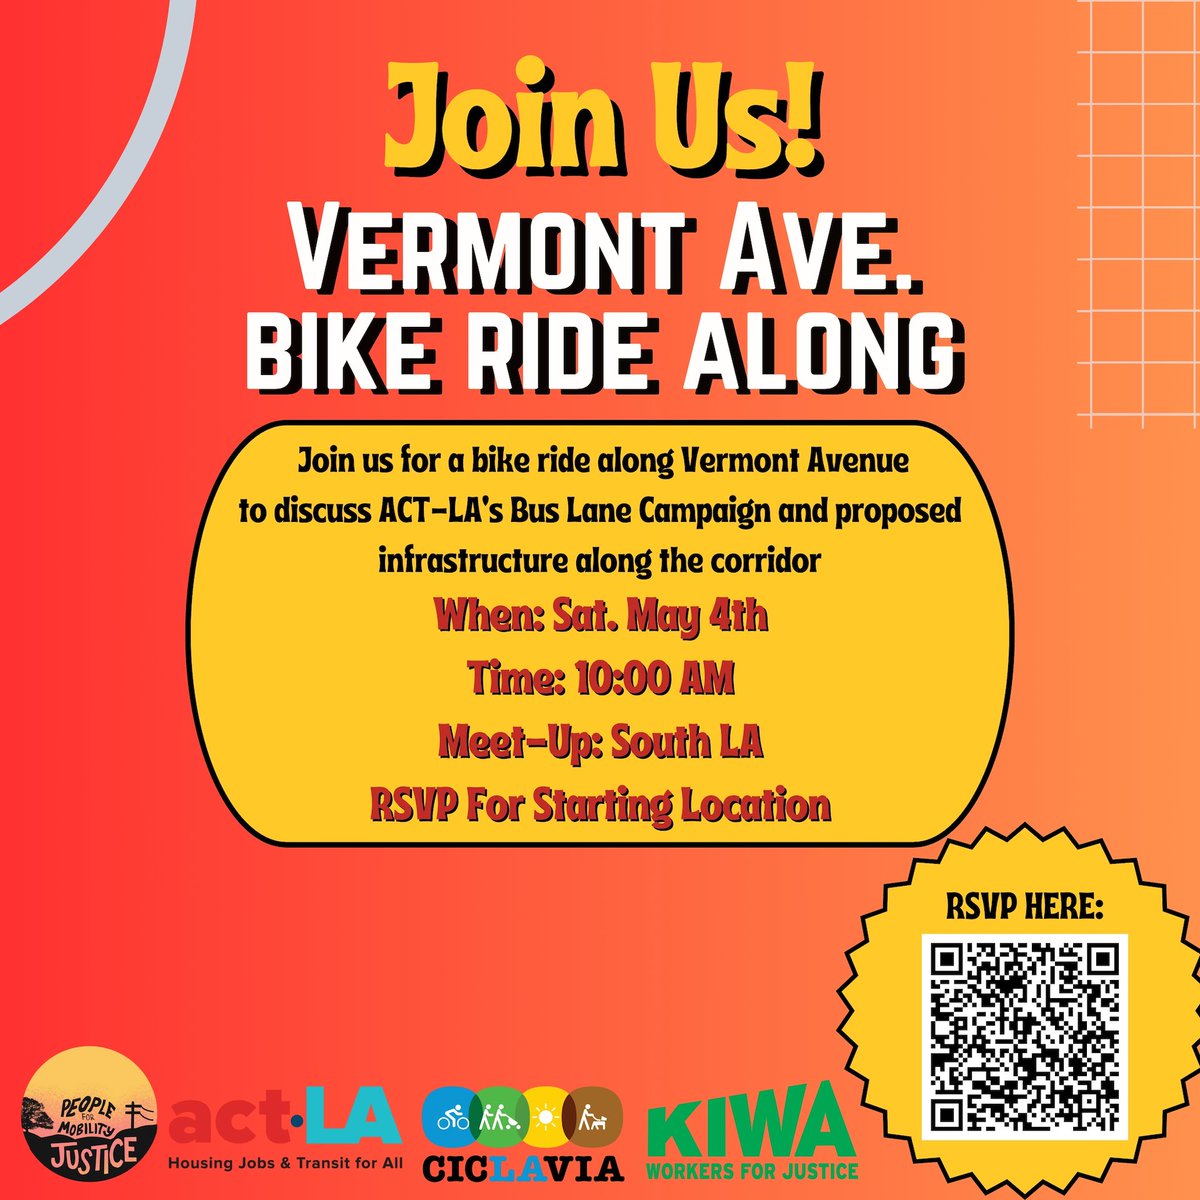 Happy #BikeMonth! 🚲 Join us in LA: Sunset Blvd & Silver Lake Mixer tonight May 4: Vermont Ave Ride for ACT-LA's Campaign May 8: Free bike lights at Hope & 7th St DTLA May 11: MANGo Milestone Ride with Santa Monica Spoke More on Metro's Bike Month page. Let's roll! 🌟